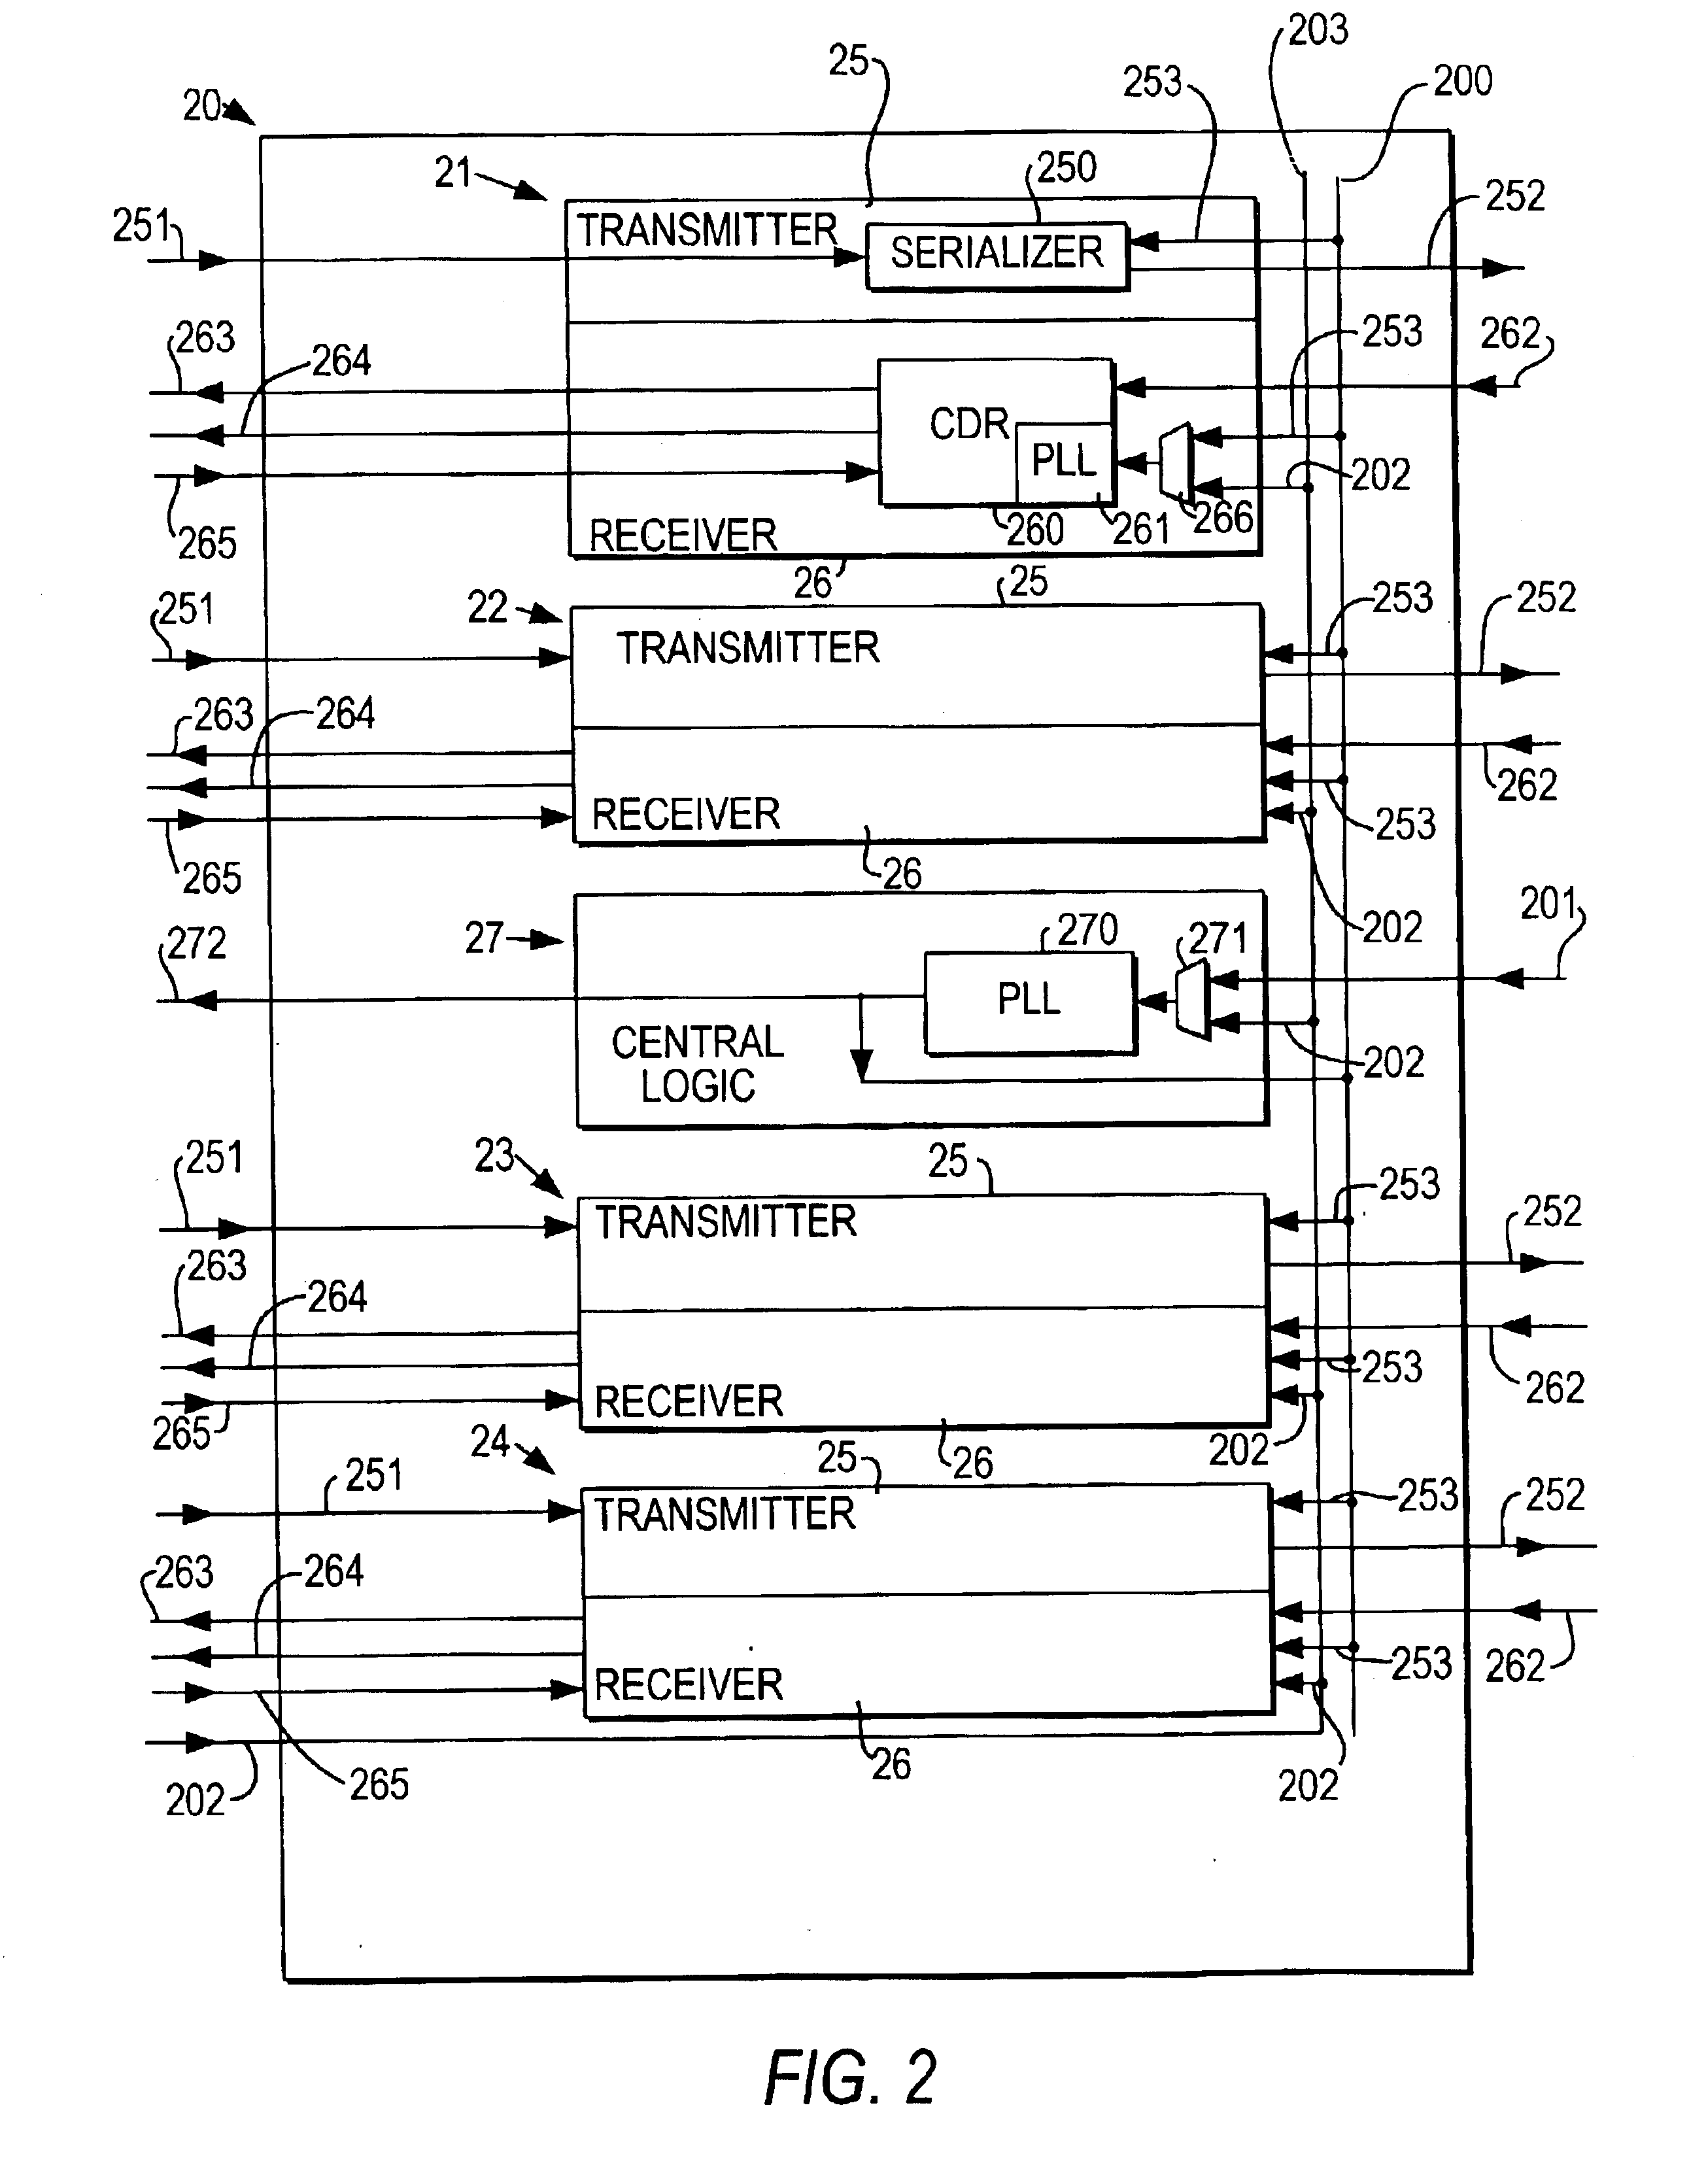 Programmable logic device serial interface having dual-use phase-locked loop circuitry